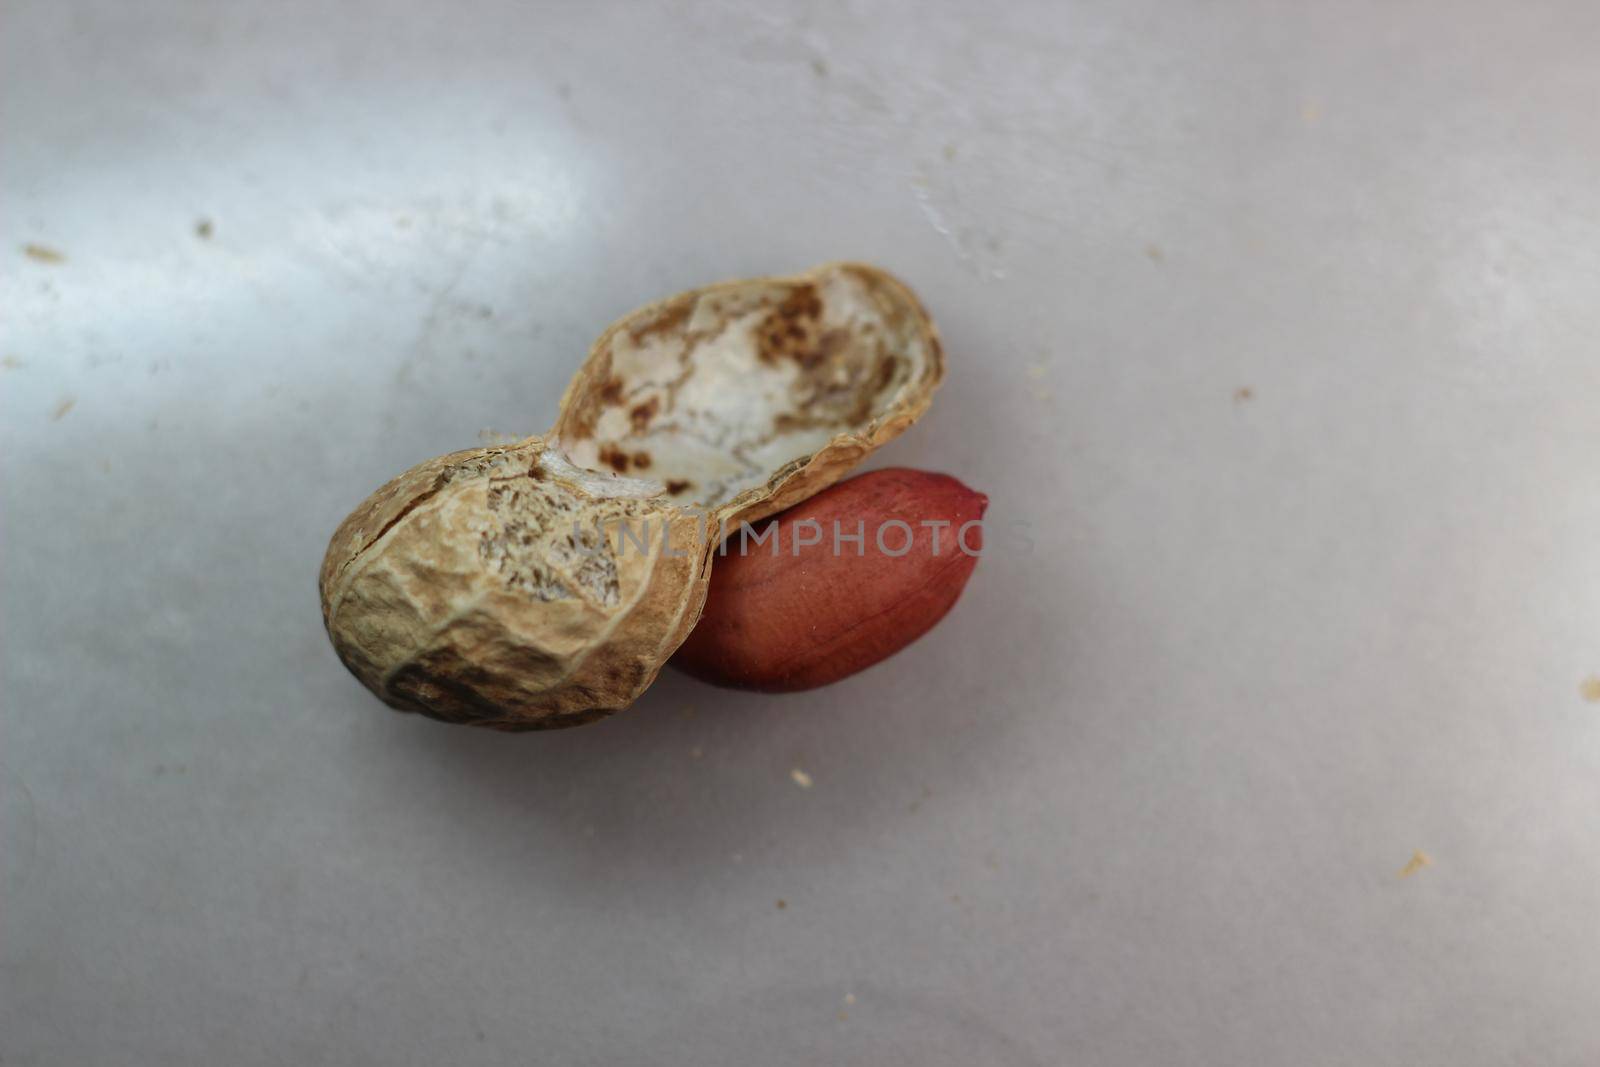 Unpeeled peanut with shells by Photochowk